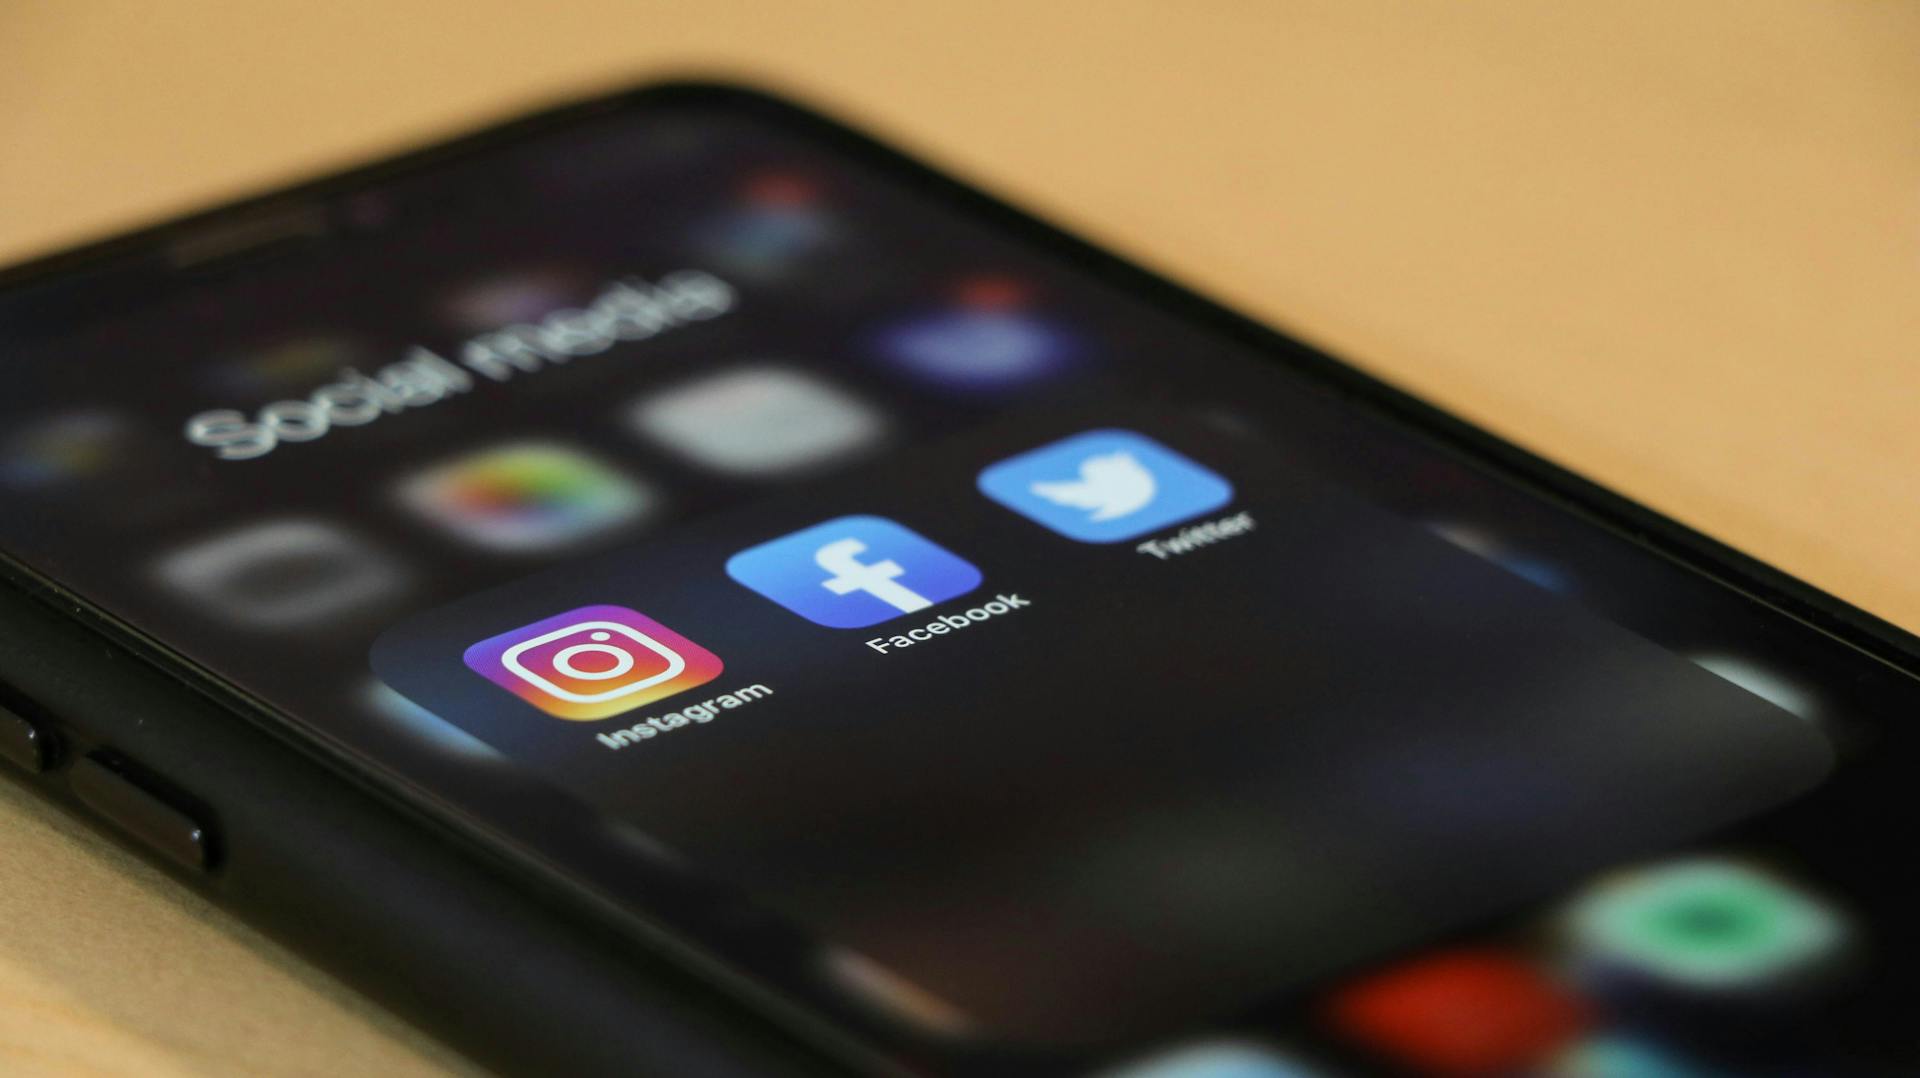 Smart phone showing top social media channel icons lit up: Instagram, Facebook, Twitter